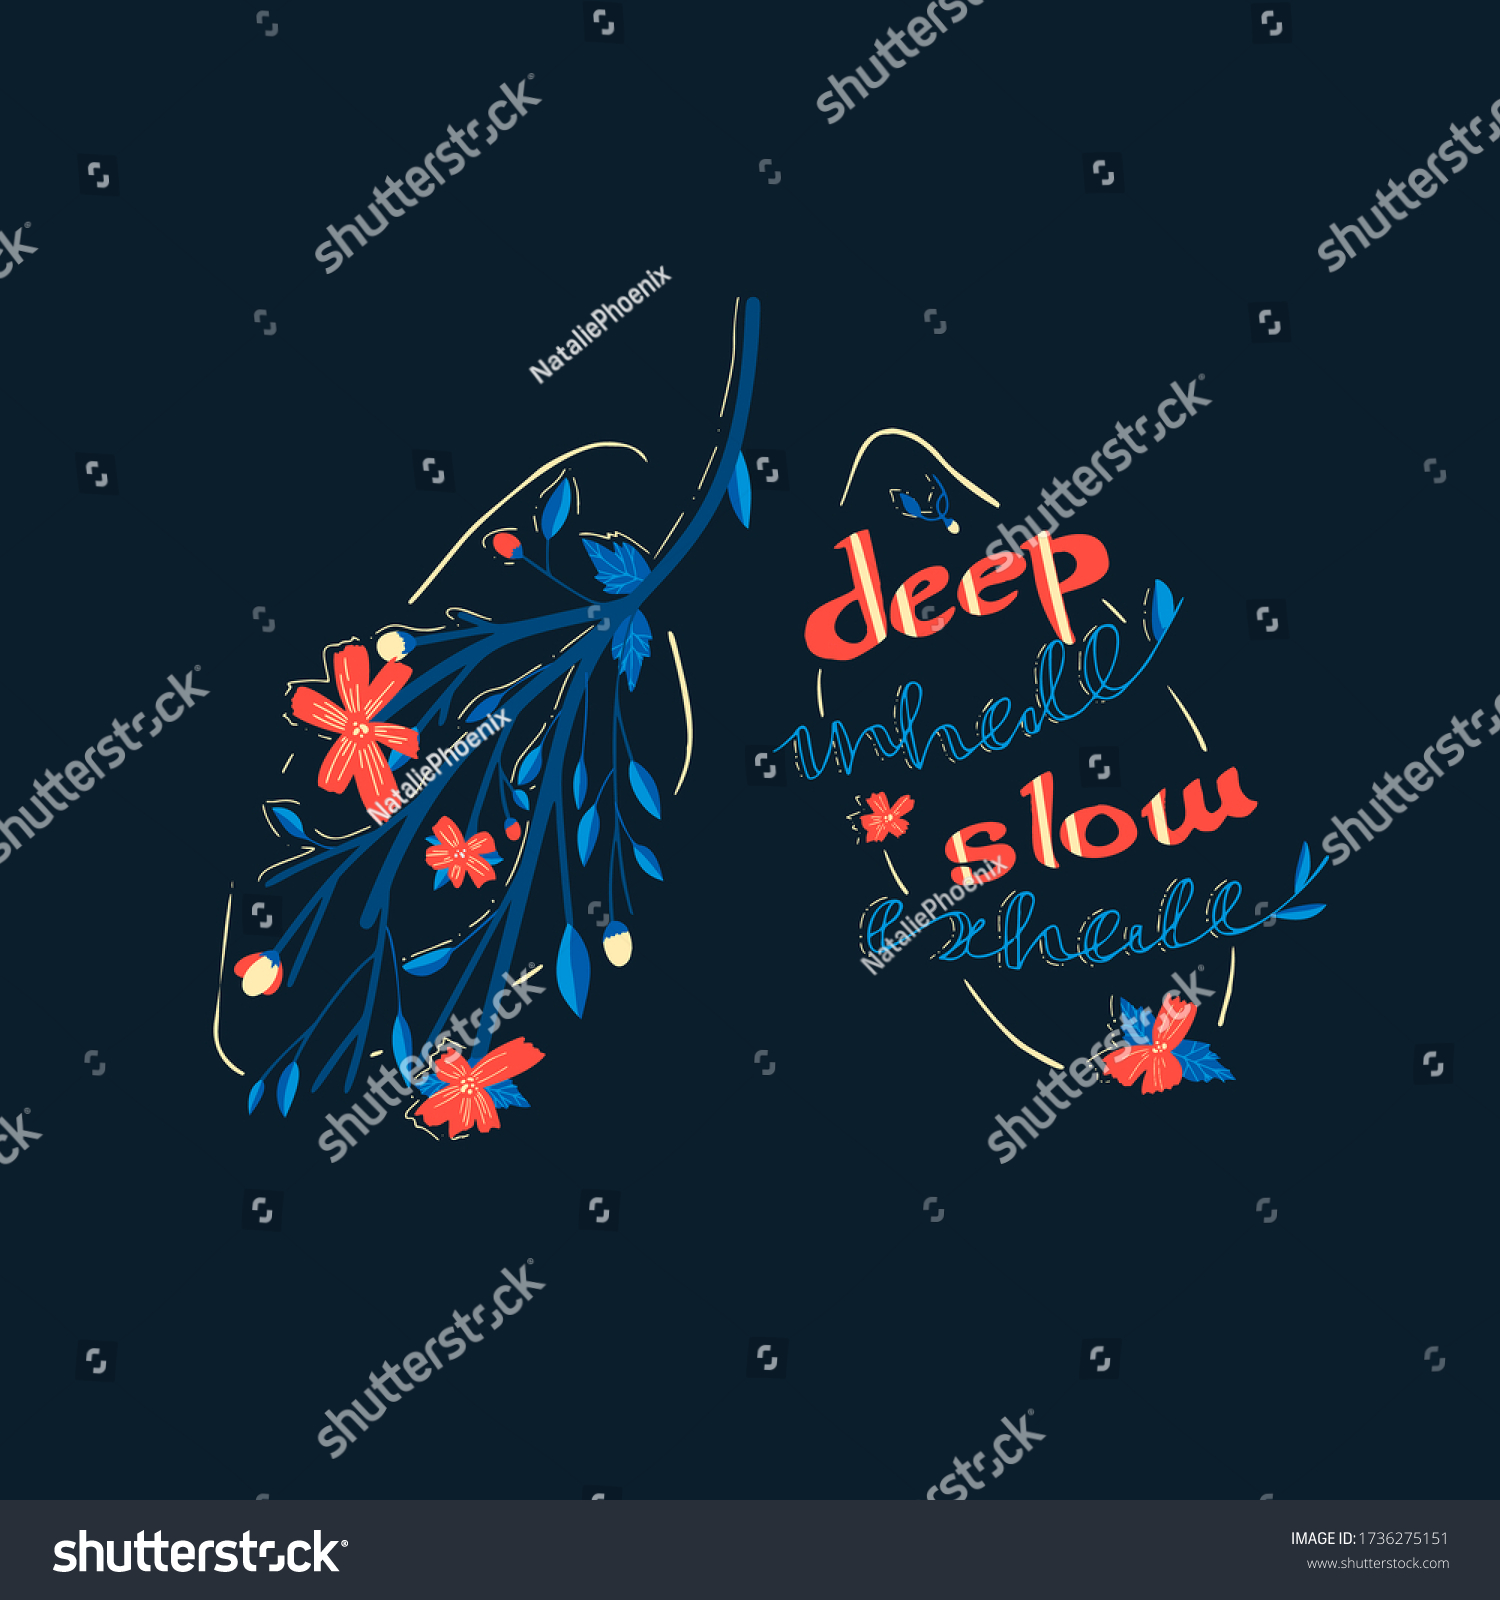 SVG of Illustration of lungs filled with flowers and lettering deep inhale long exhale. T-shirt, print, postcard design with gentle meditation instruction svg